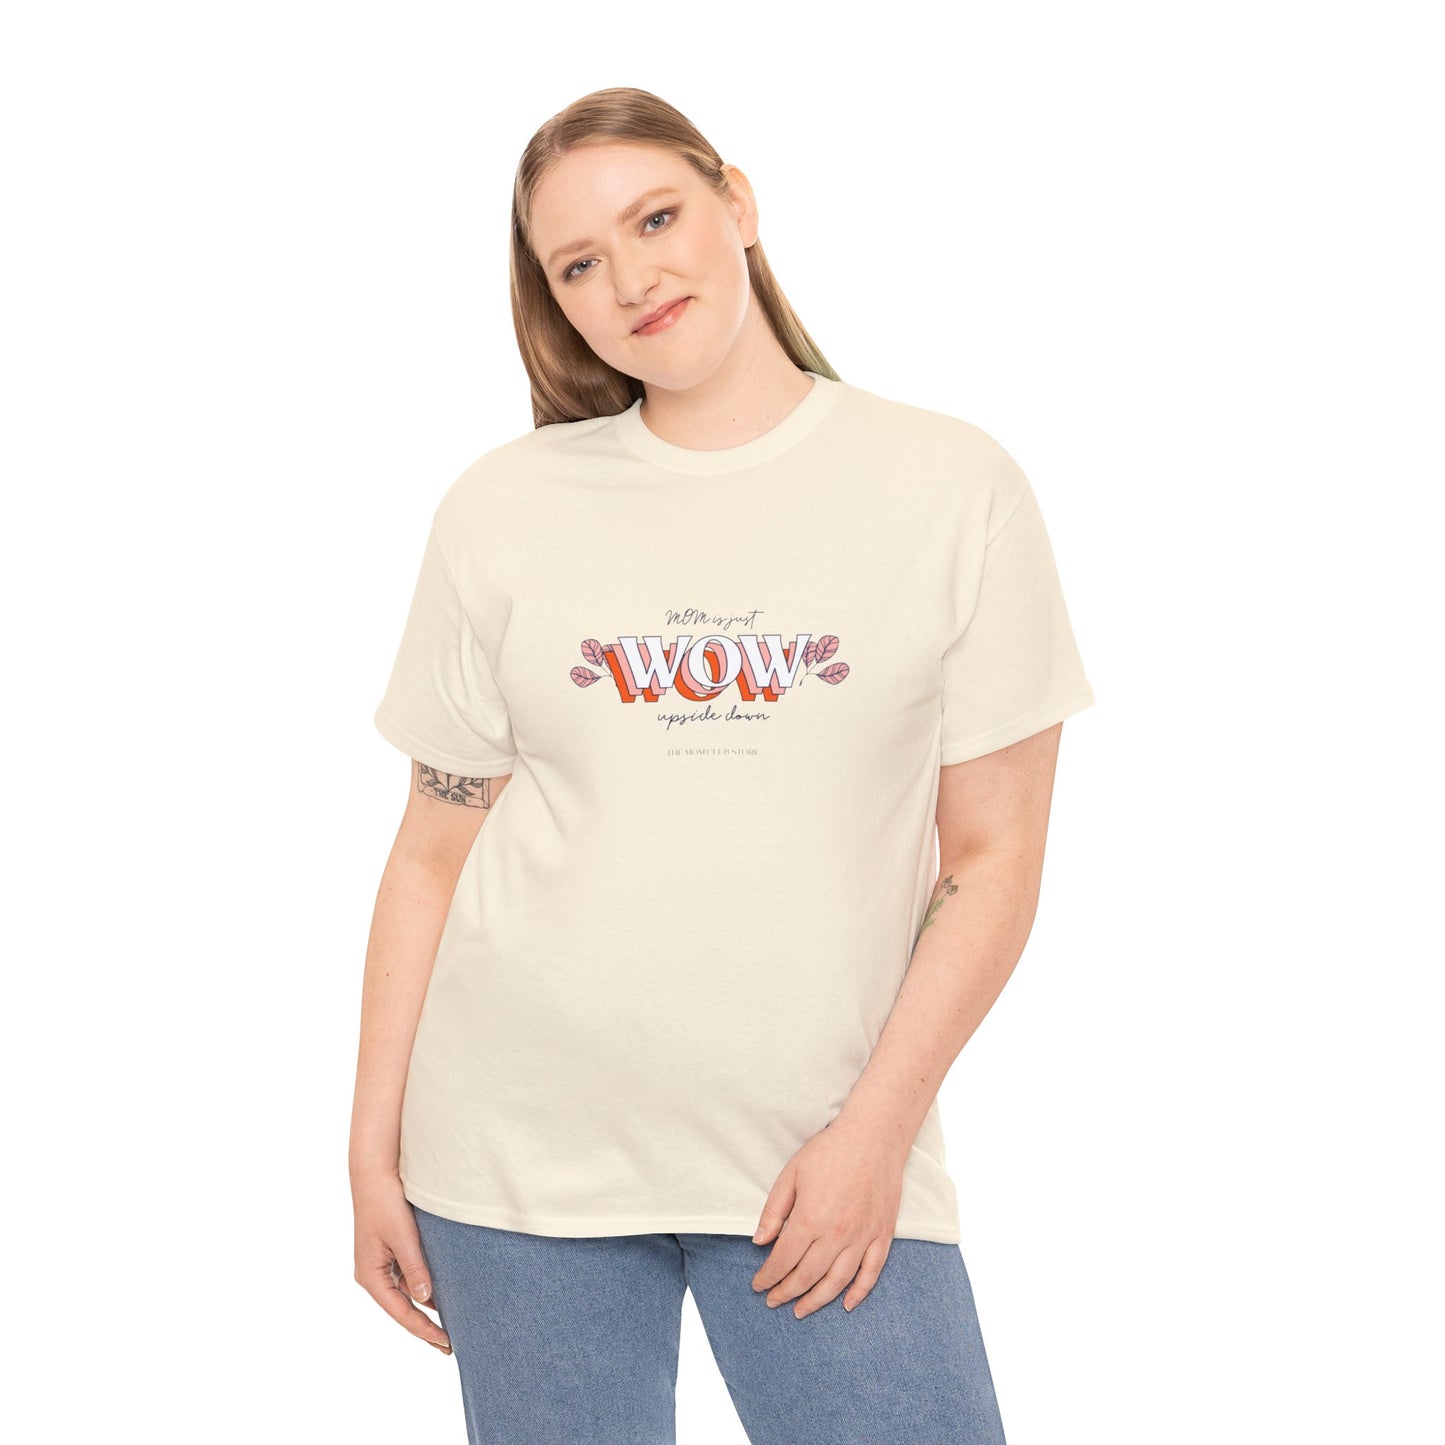 Mom is just WOW upside down t-shirt